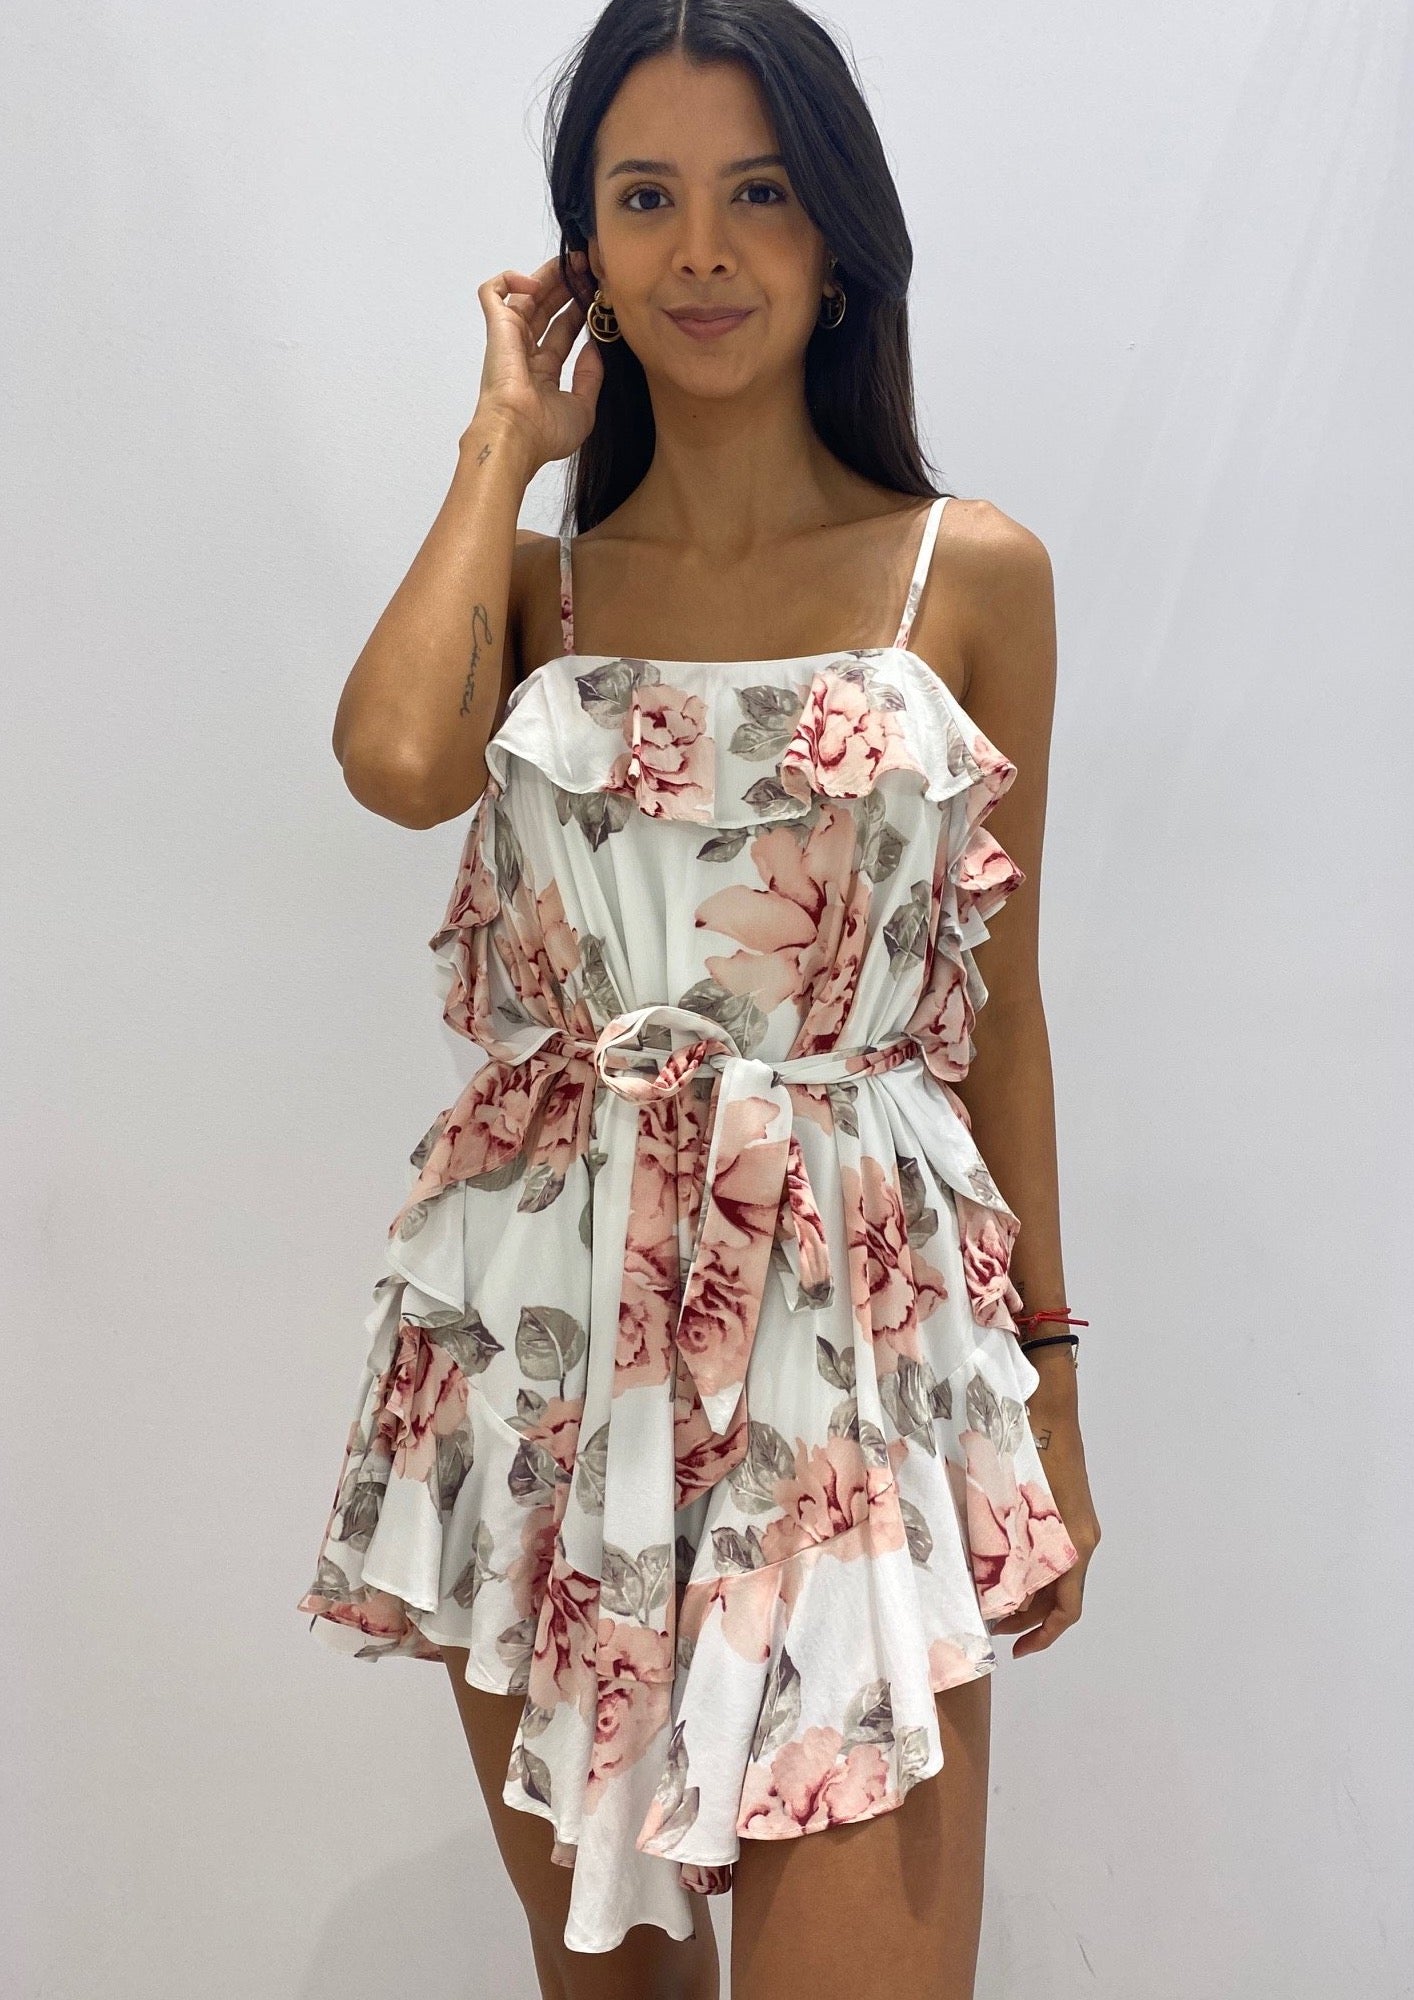 Fashion Strap White Multi-Color Floral Print Tie-Up Ruffle Sleeveless Dress